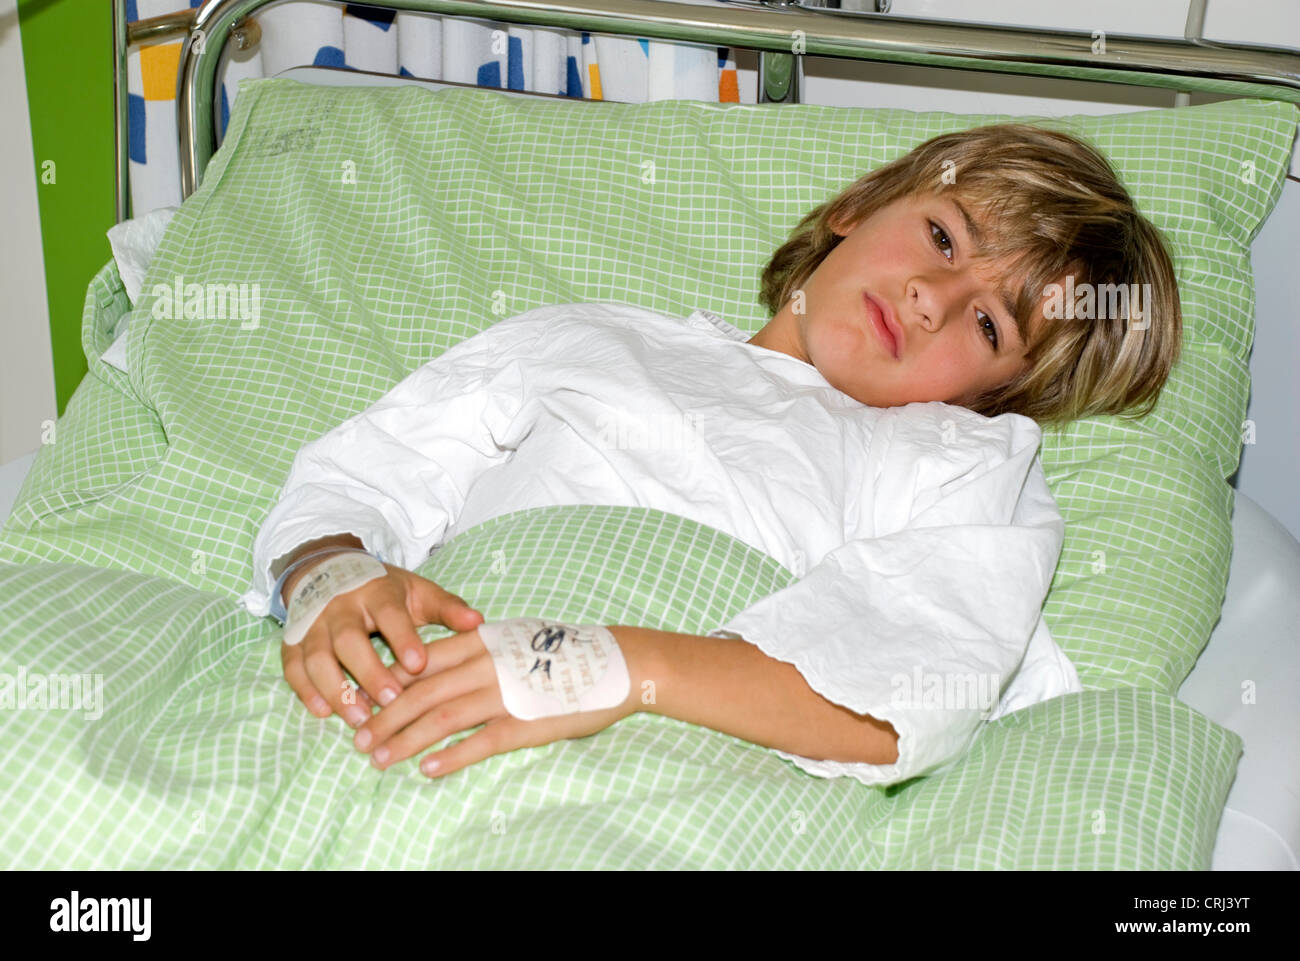 1o yeras old child lying in bed in in children hospital Stock Photo